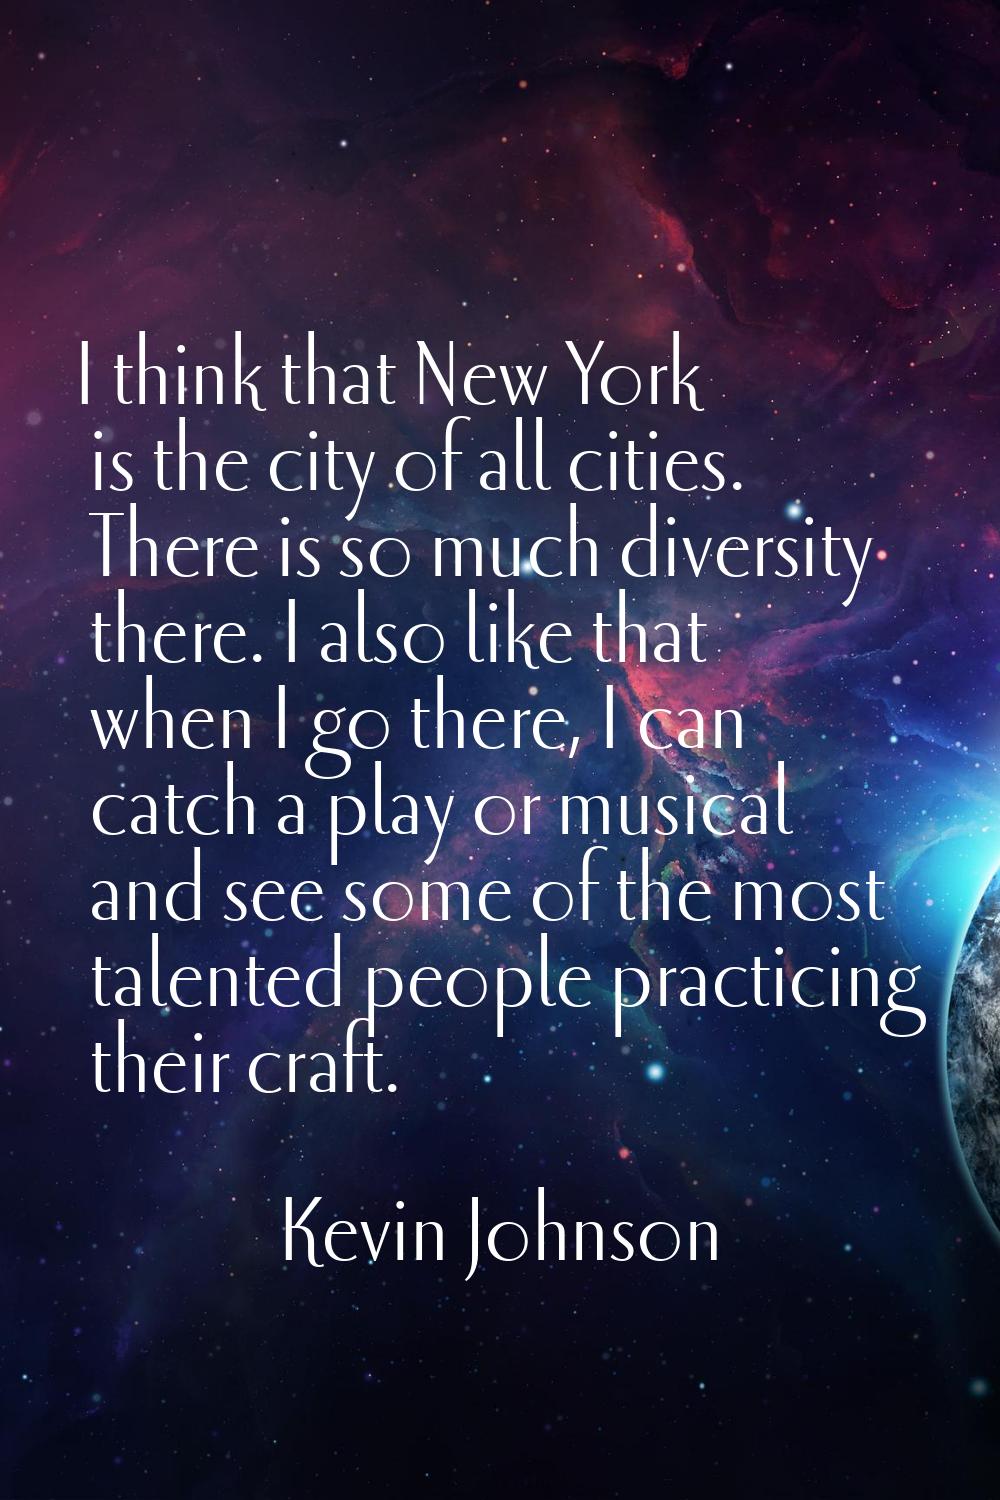 I think that New York is the city of all cities. There is so much diversity there. I also like that